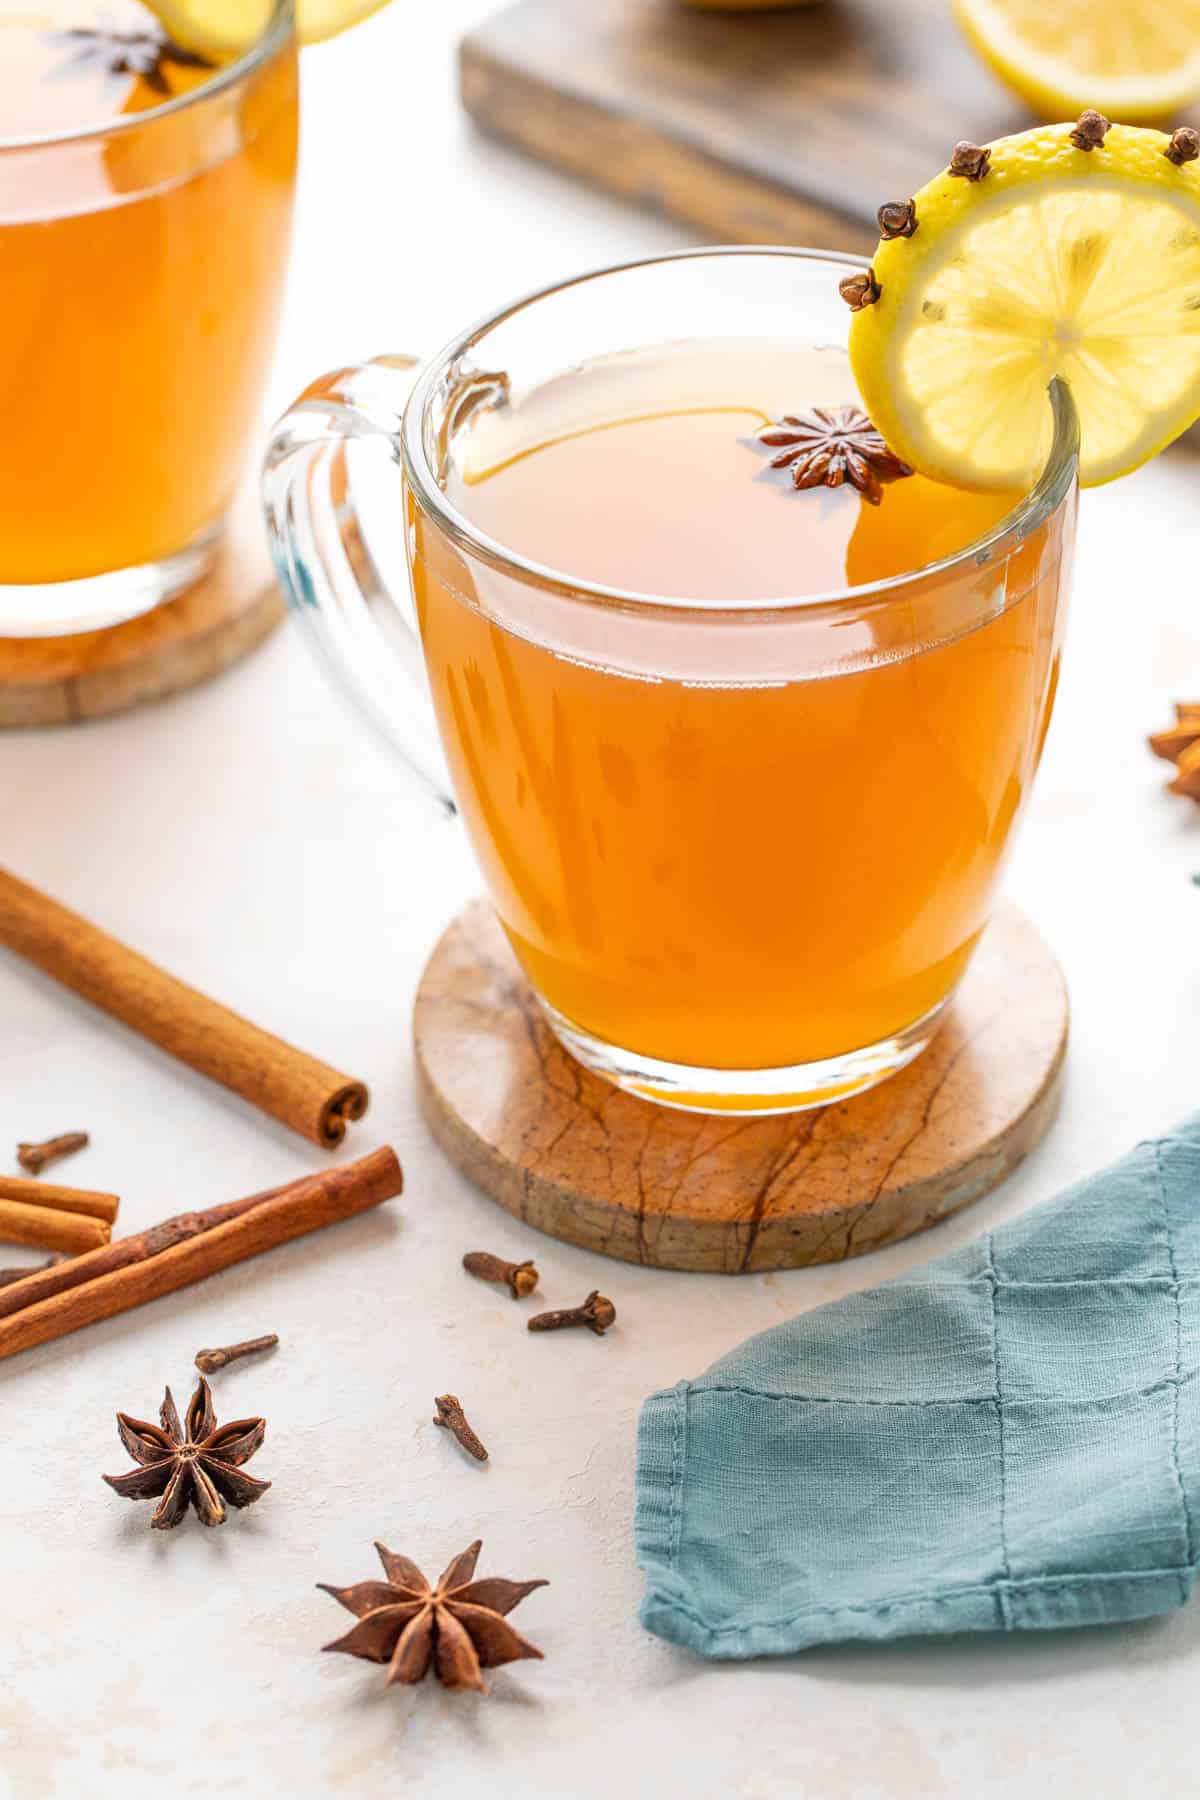 A hot toddy drink garnished with lemon and star anise.